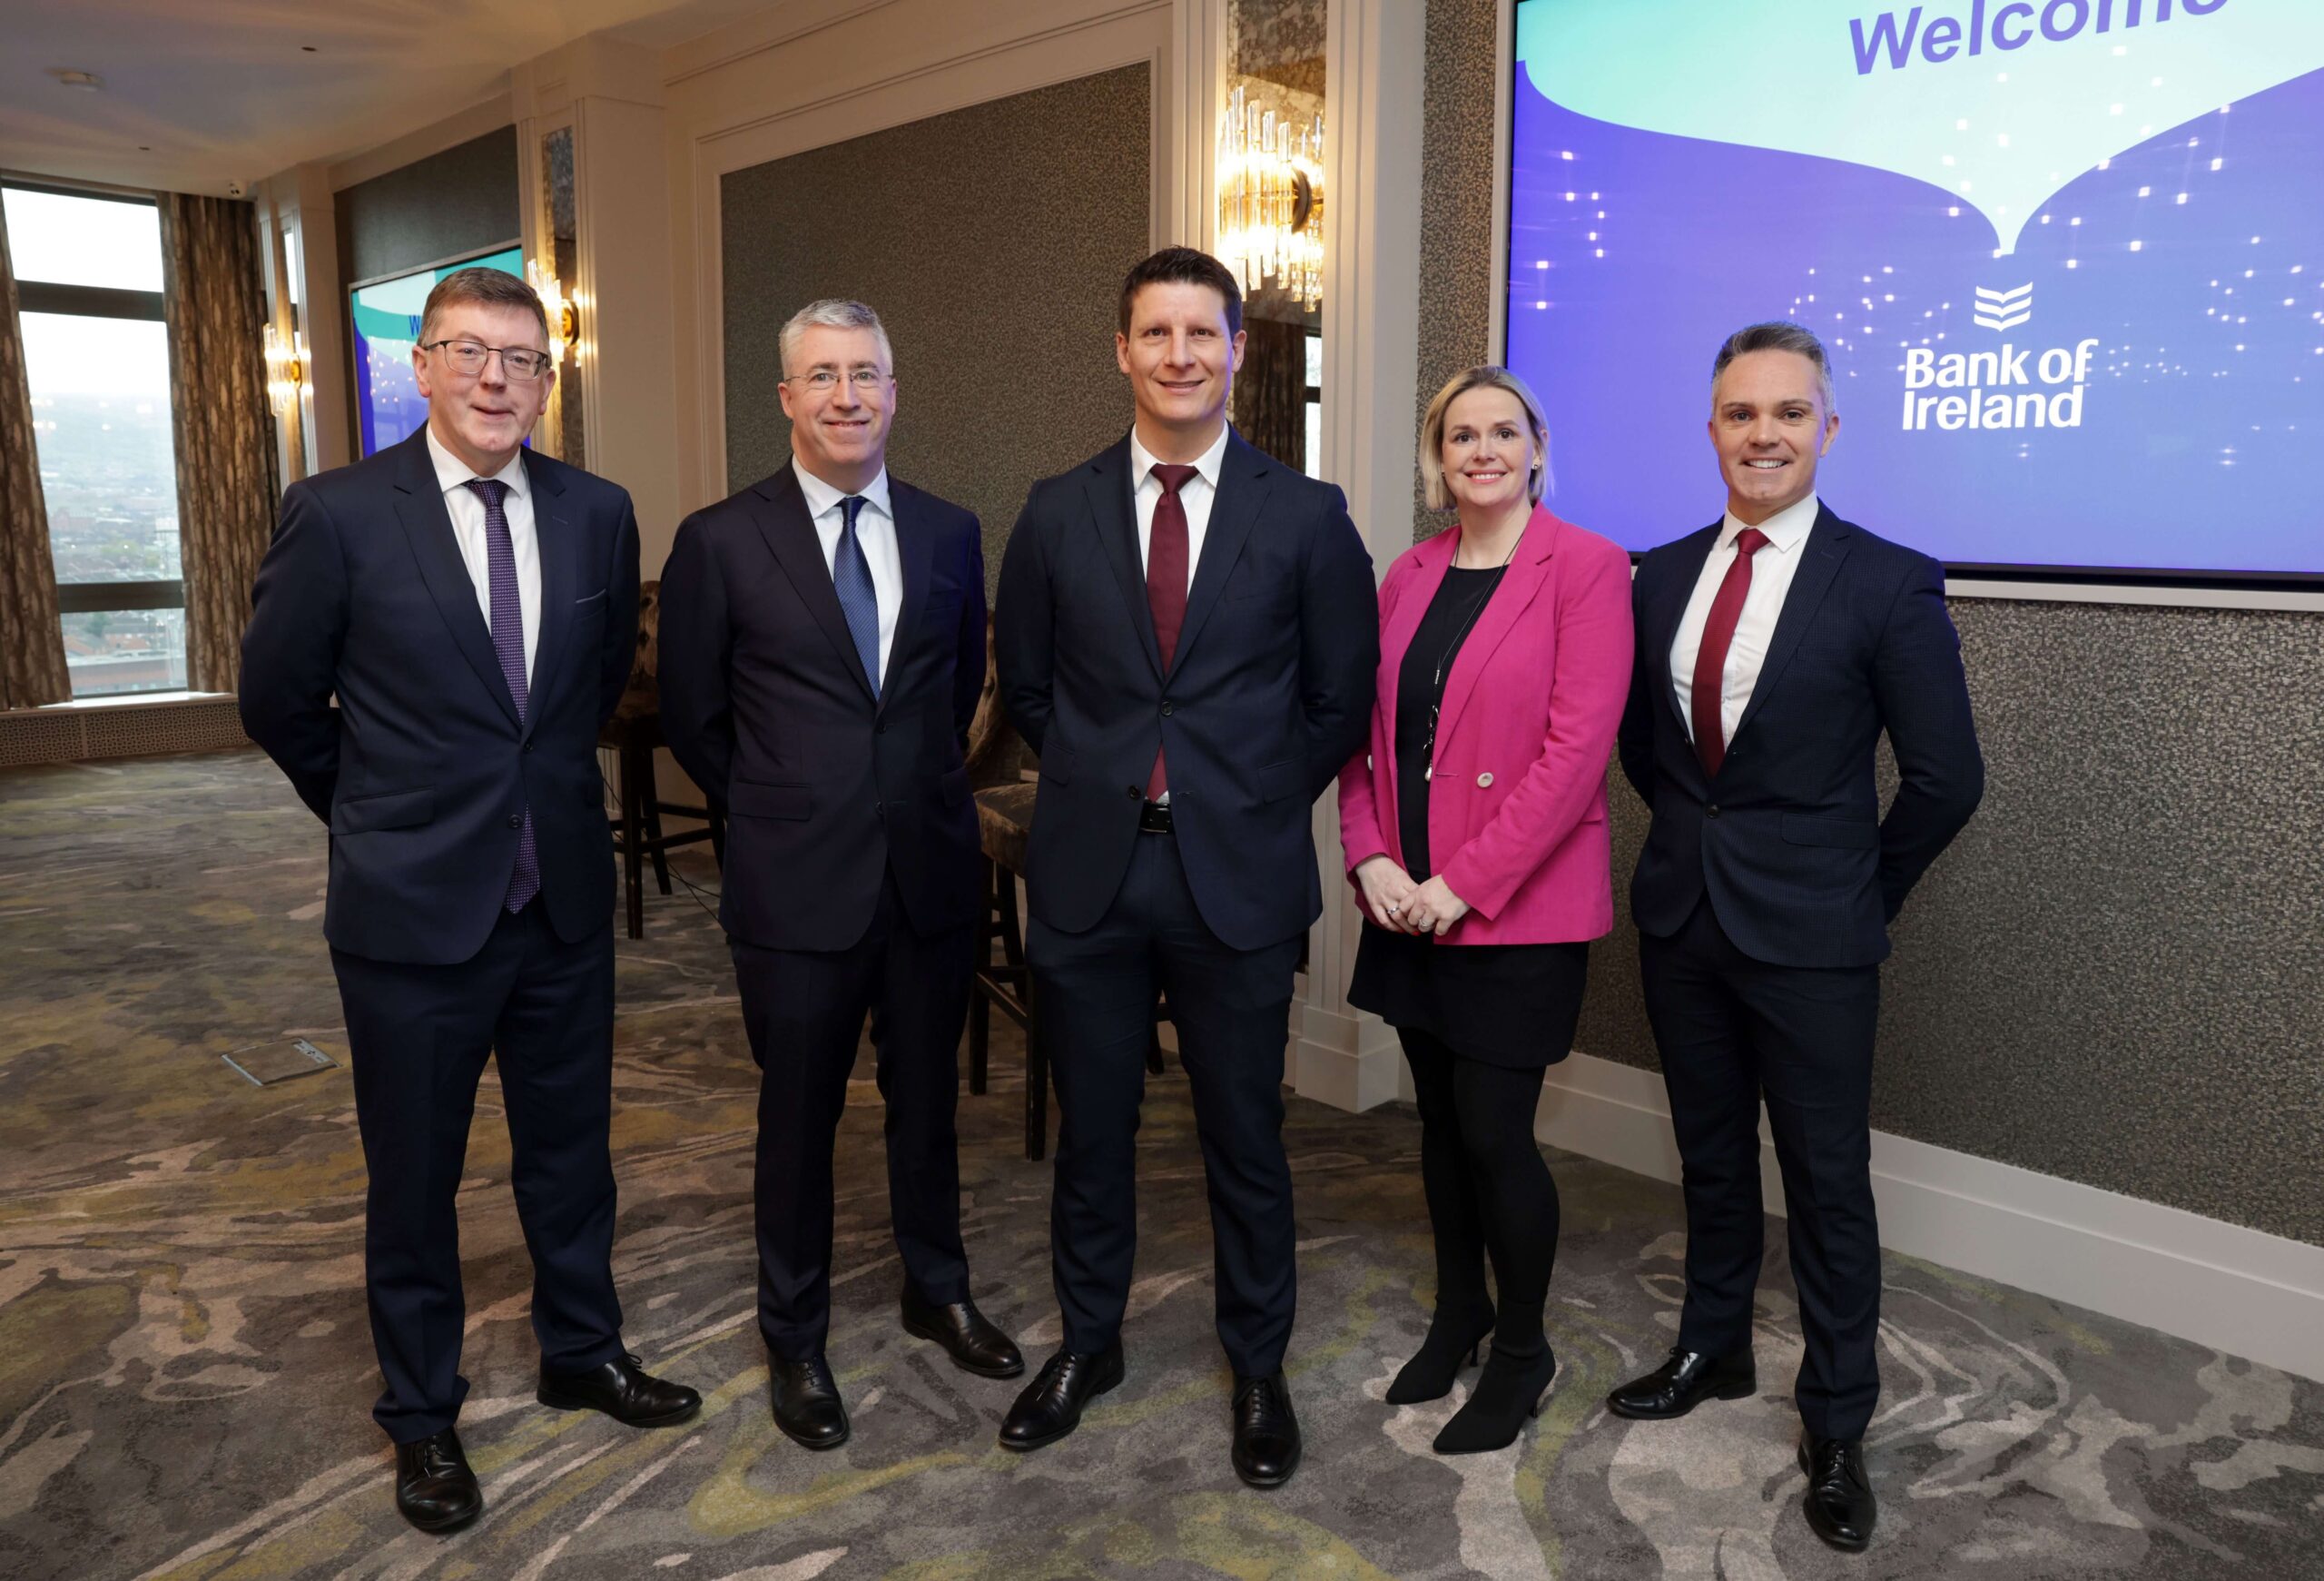 From left Alan Bridle, Economist, Bank of Ireland, Donough Kilmurray, Chief Investment Officer, Davy, Paul Magee, Director, Corporate Banking NI, Bank of Ireland, Colette Shirley, Director of Sustainability, Corporates & Markets, Bank of Ireland and Colm Moane, Associate Director, Corporate Banking NI, Bank of Ireland.